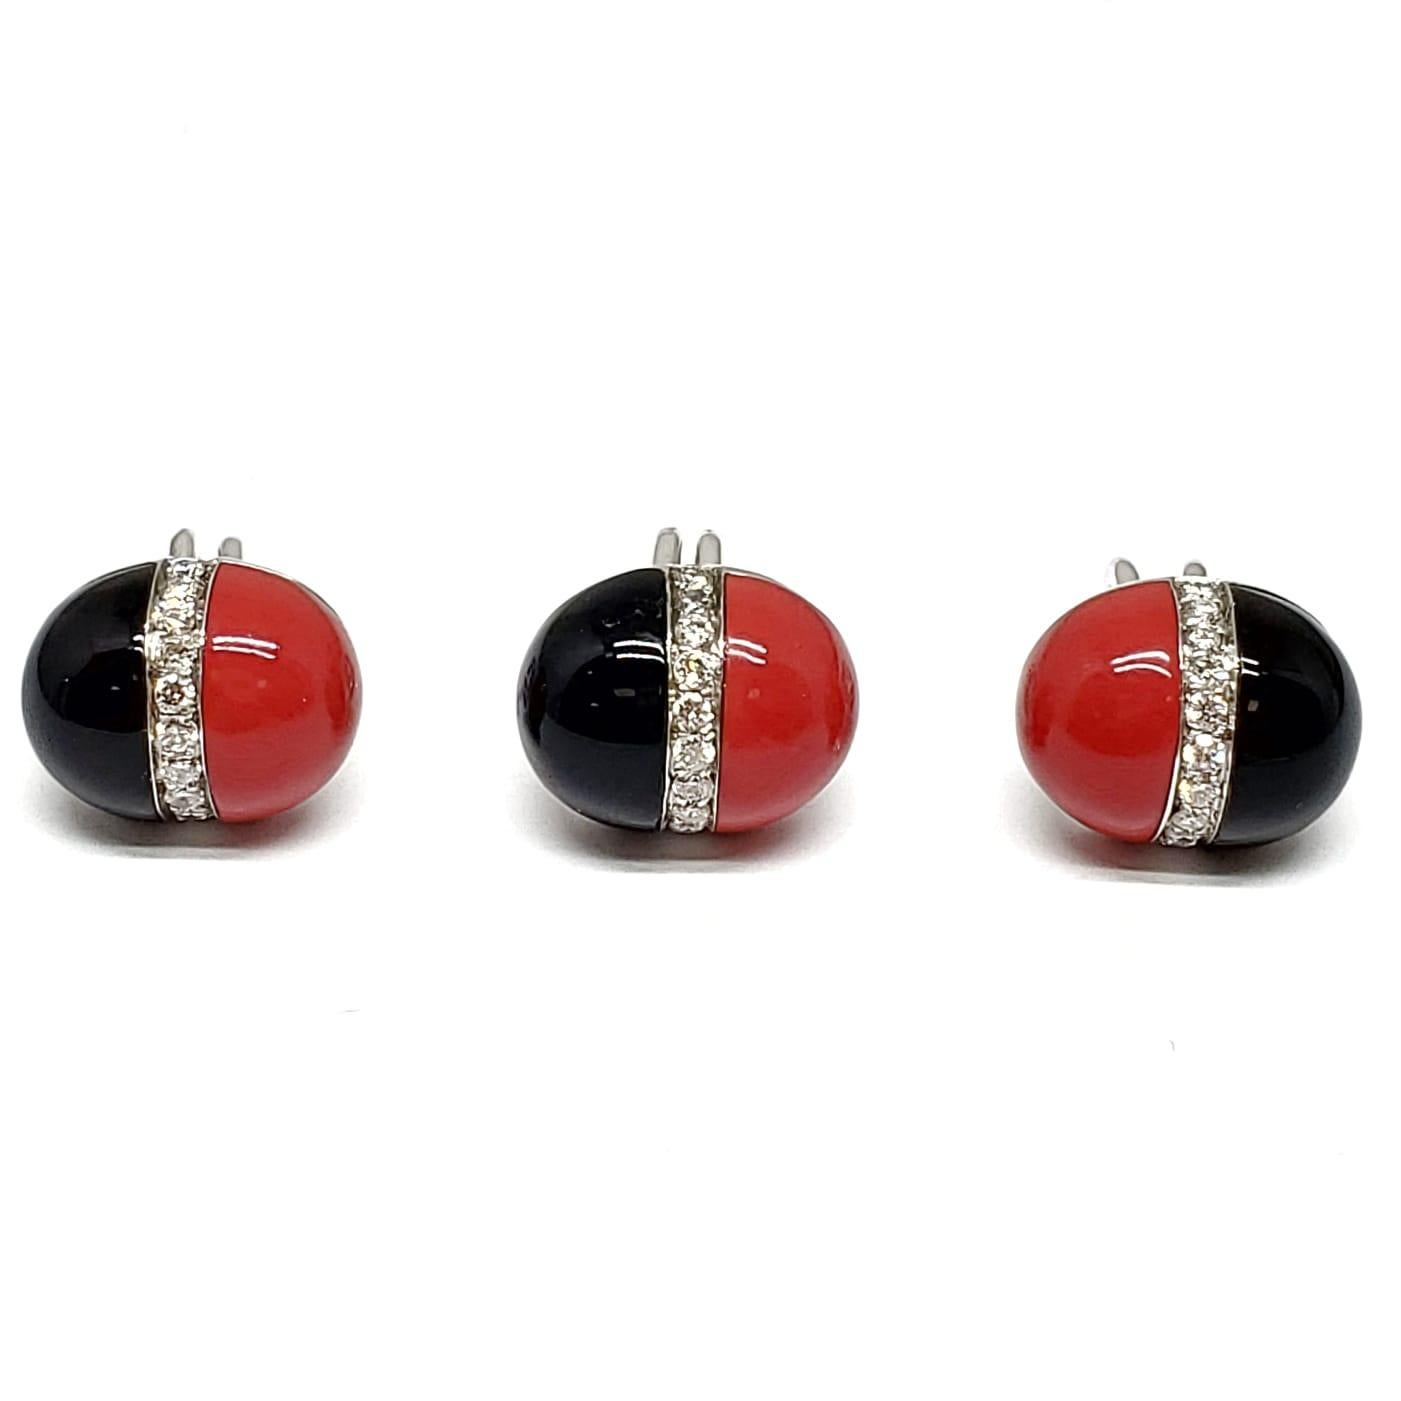 Andreoli Onyx Diamond Reconstitued Coral Mens Shirt Tuxedo Studs 18k White Gold

These Andreoli shirt tuxedo studs features:
- 0.51 carat Diamond
- Onyx
- Reconstituted Italian Coral
- 18 Karat White Gold
- Made in Italy
- Matching cufflinks